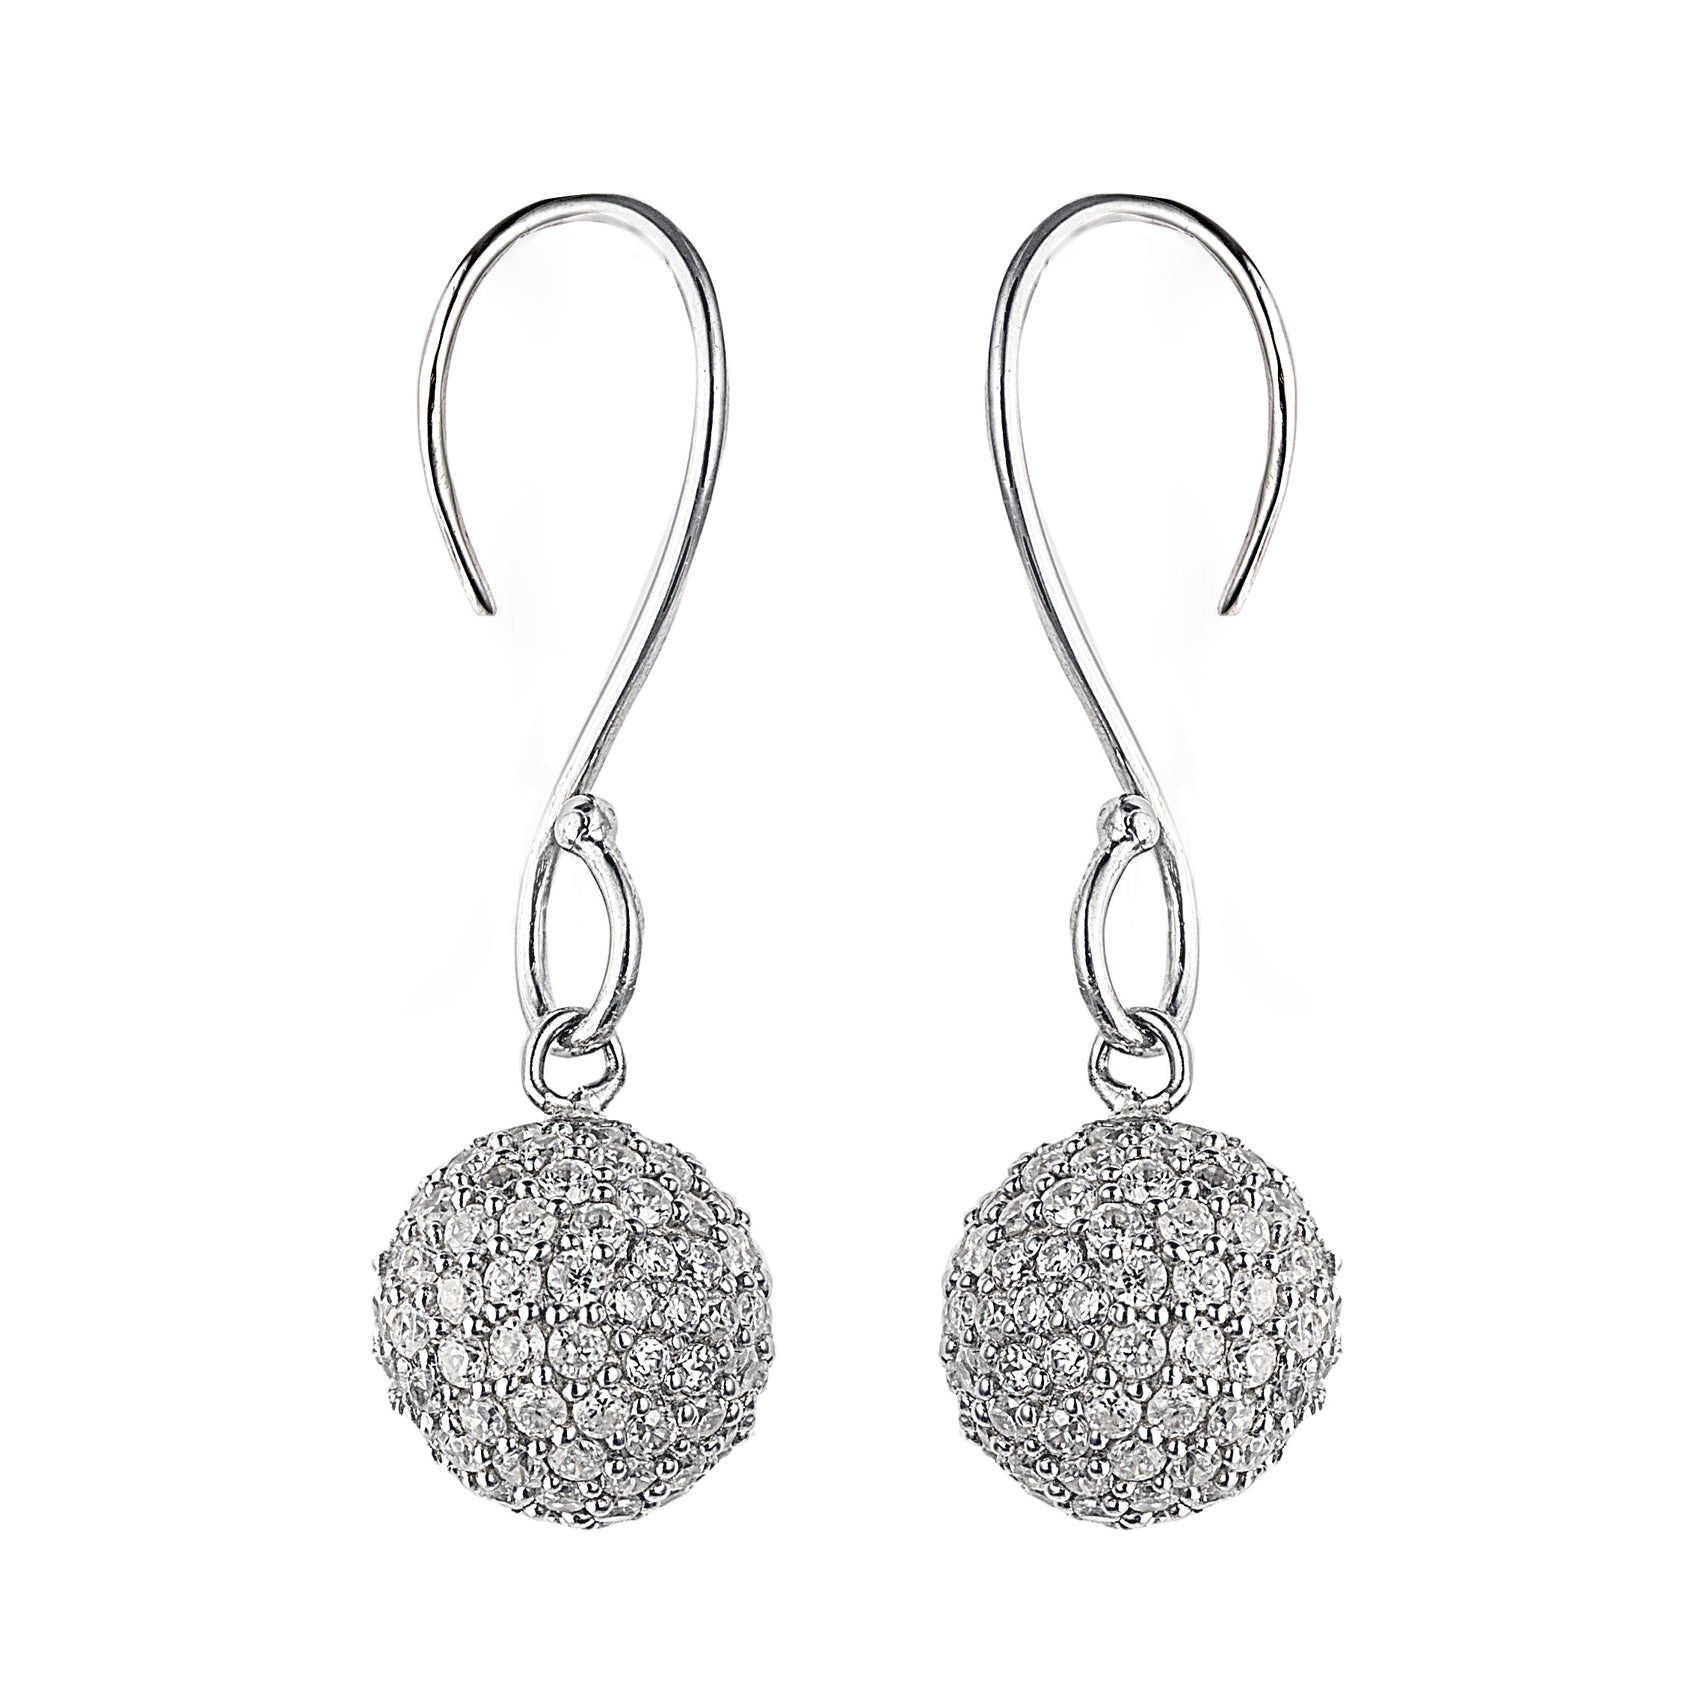 Elegant Parisian 925 Ball drop earrings encrusted with Cubic Zirconia Stones. Matches our Bella Ball Necklace. Worldwide Shipping.